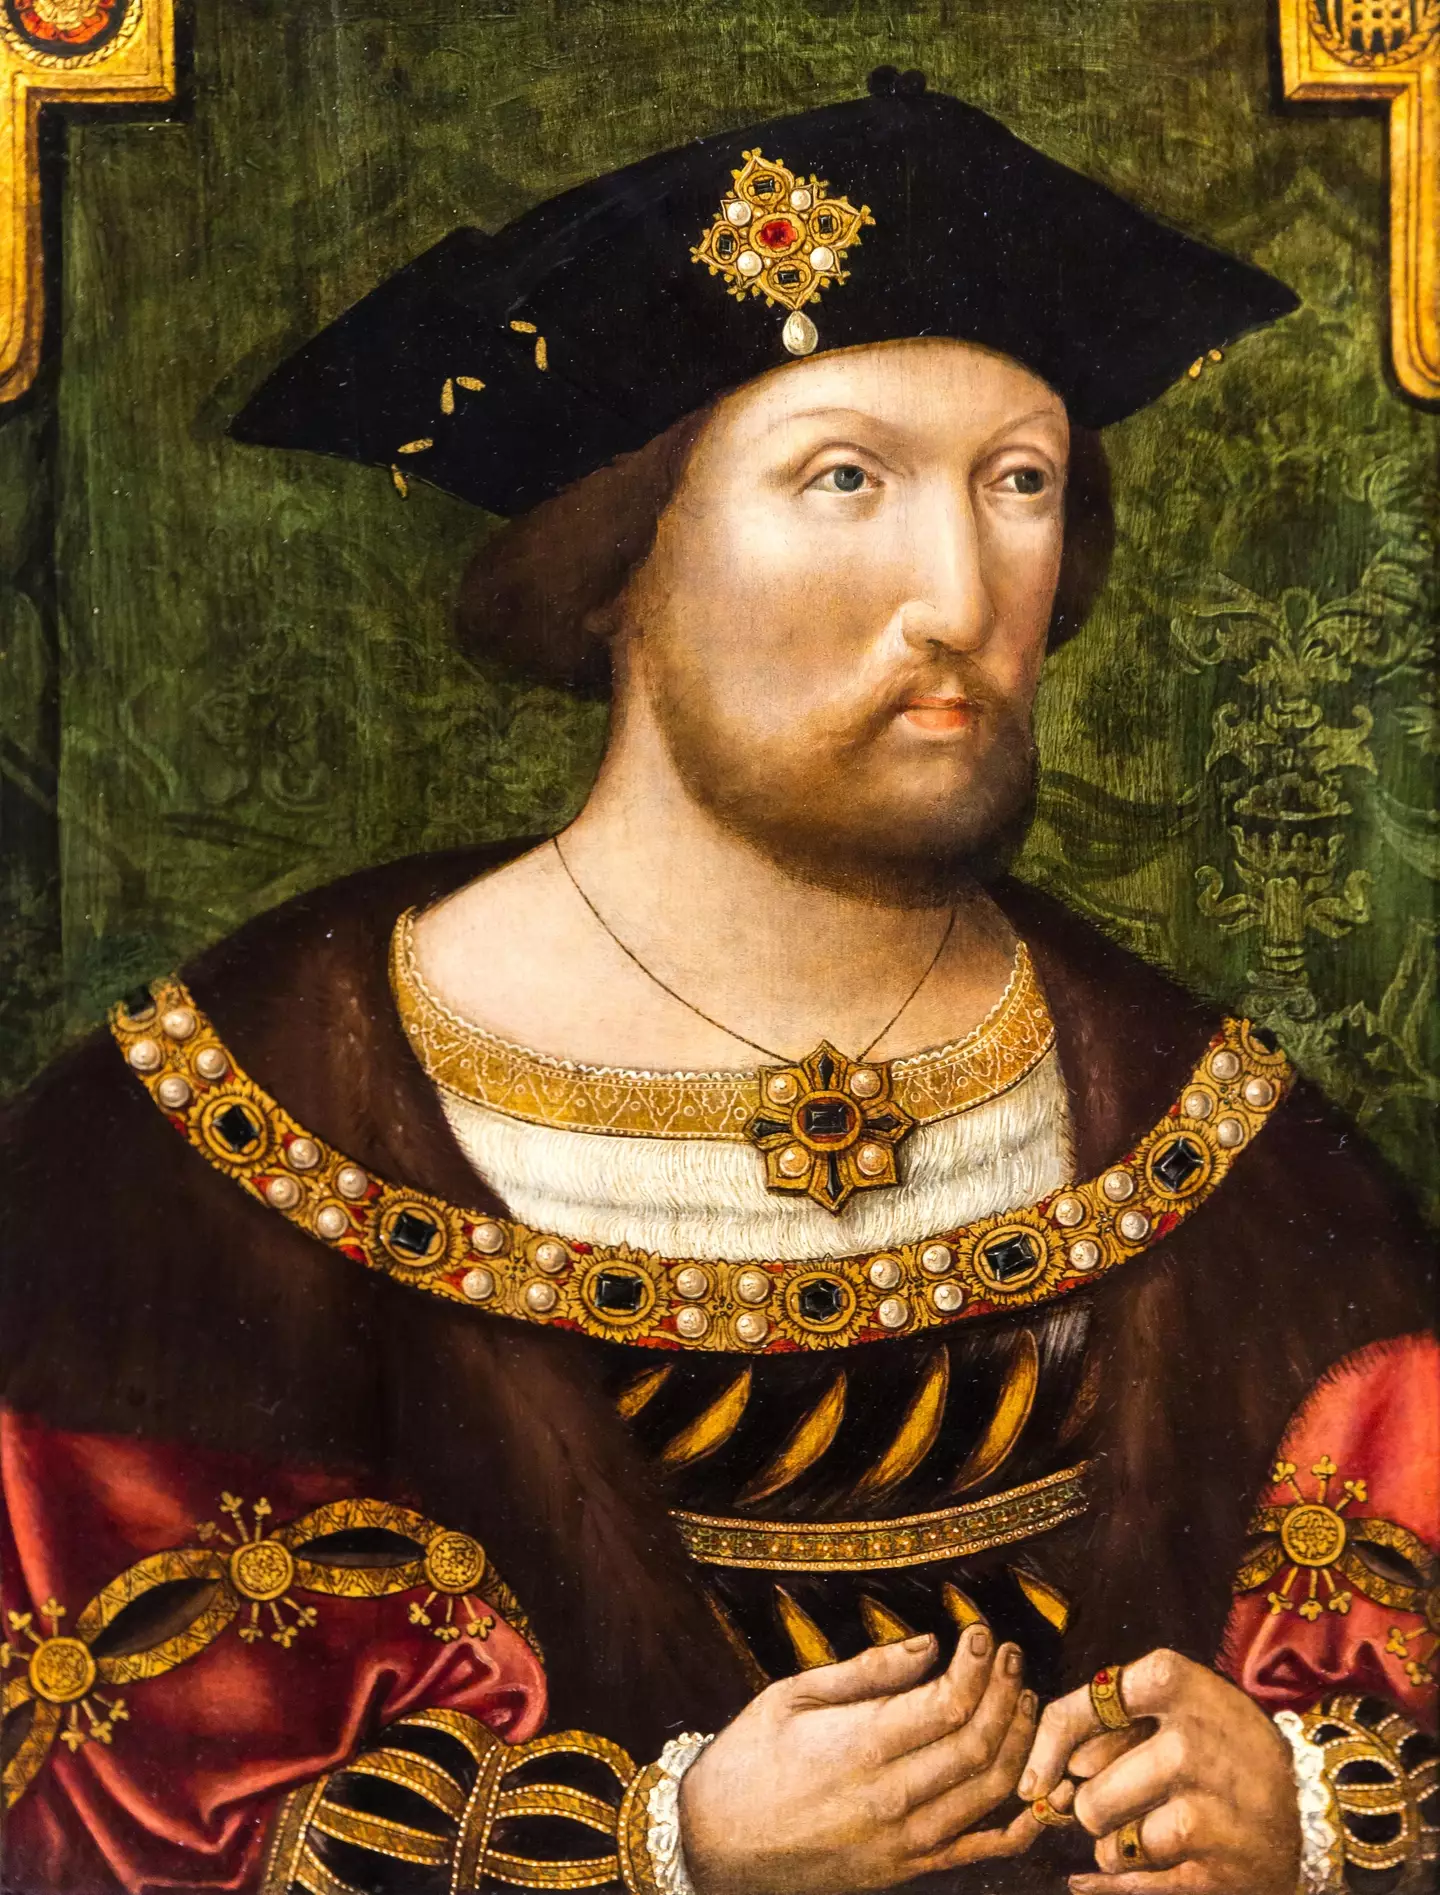 Henry VIII, a young and athletic studmuffin in his early reign, has been the victim of 'fake news' according to a historian.